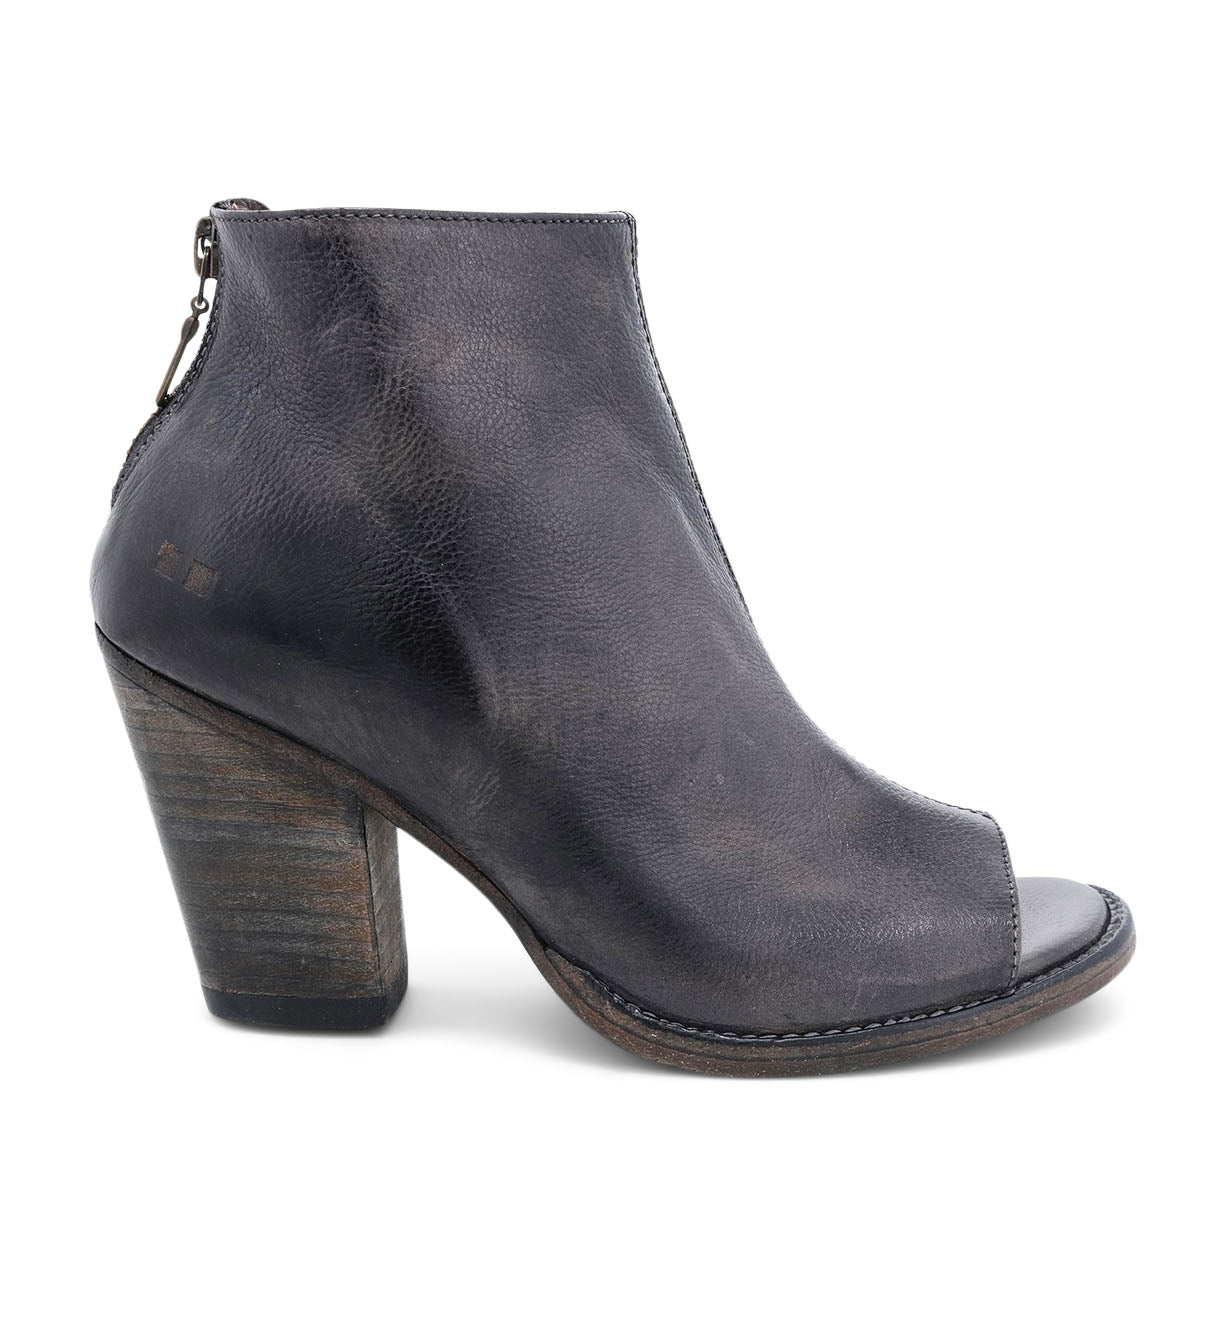 A black leather Bed Stu ankle boot with a wooden heel.